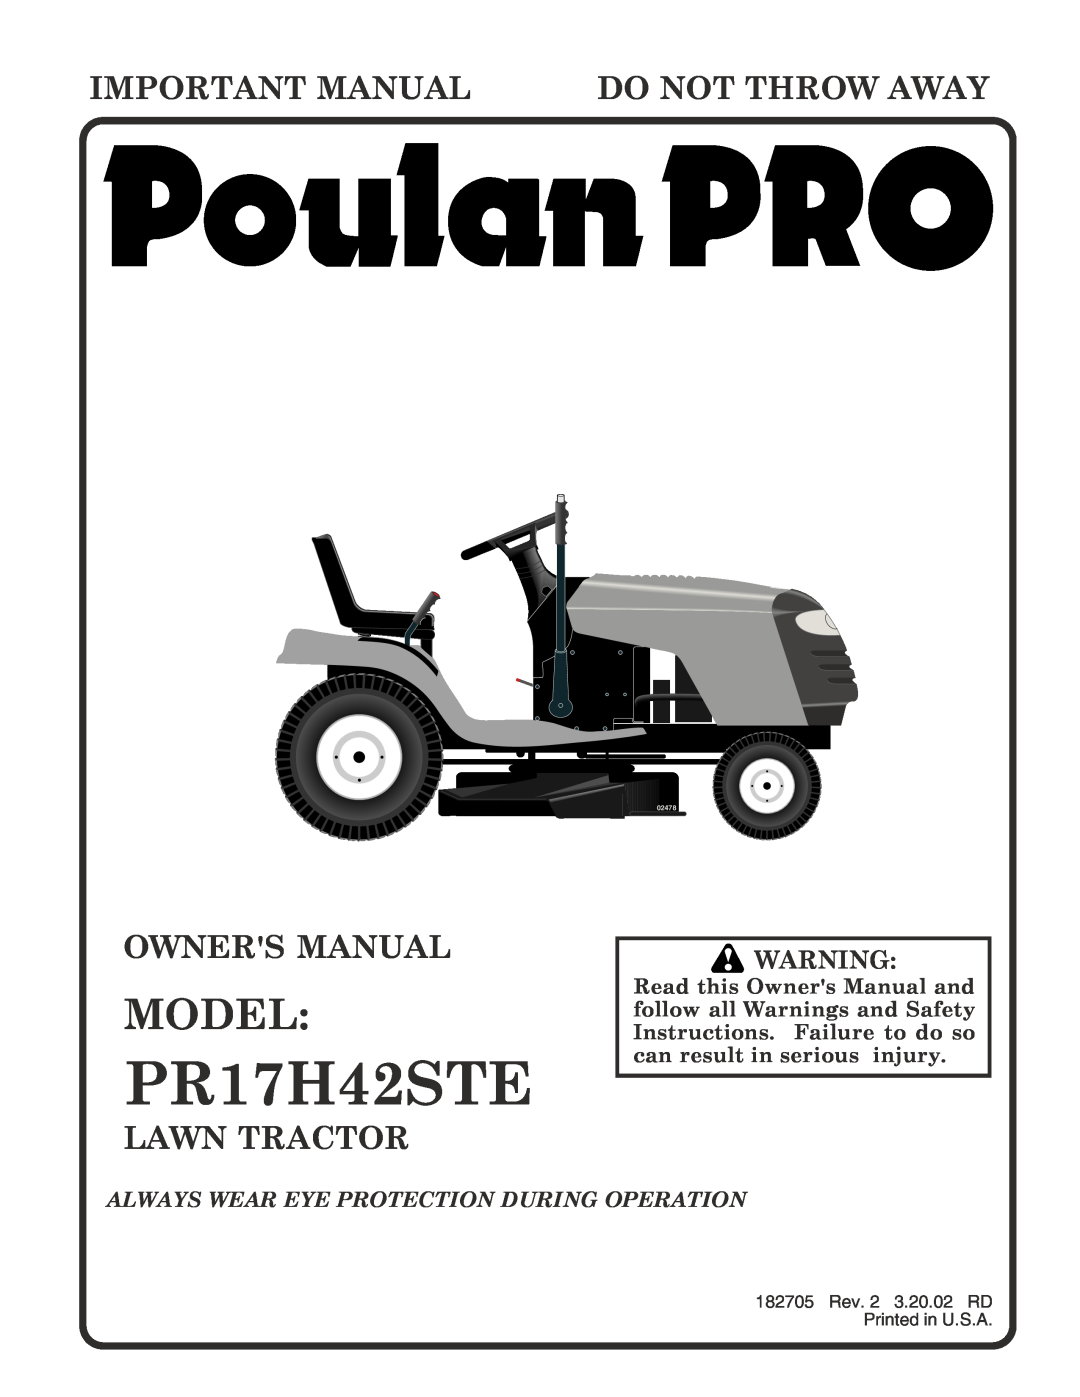 Poulan PR17H42STE owner manual Model, Important Manual, Do Not Throw Away, Lawn Tractor, 02478 